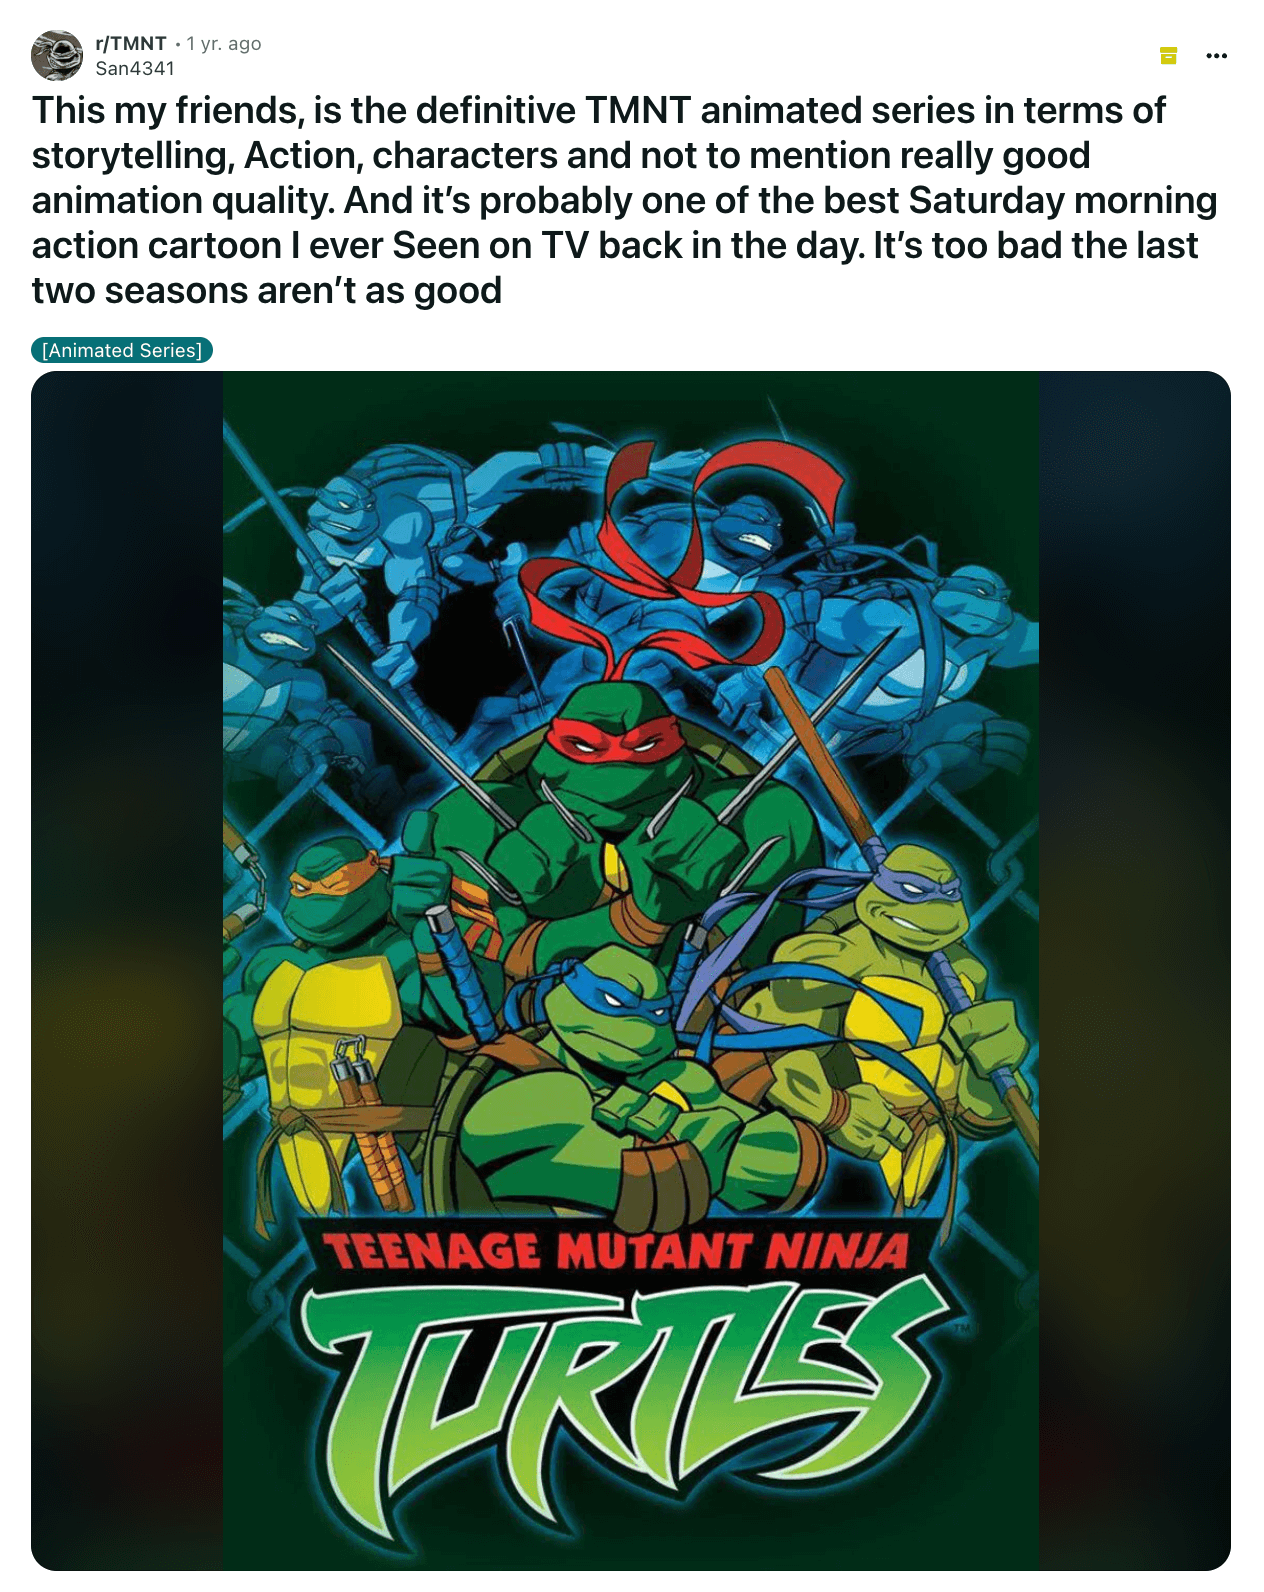 At this point, there have been many different versions of TMNT